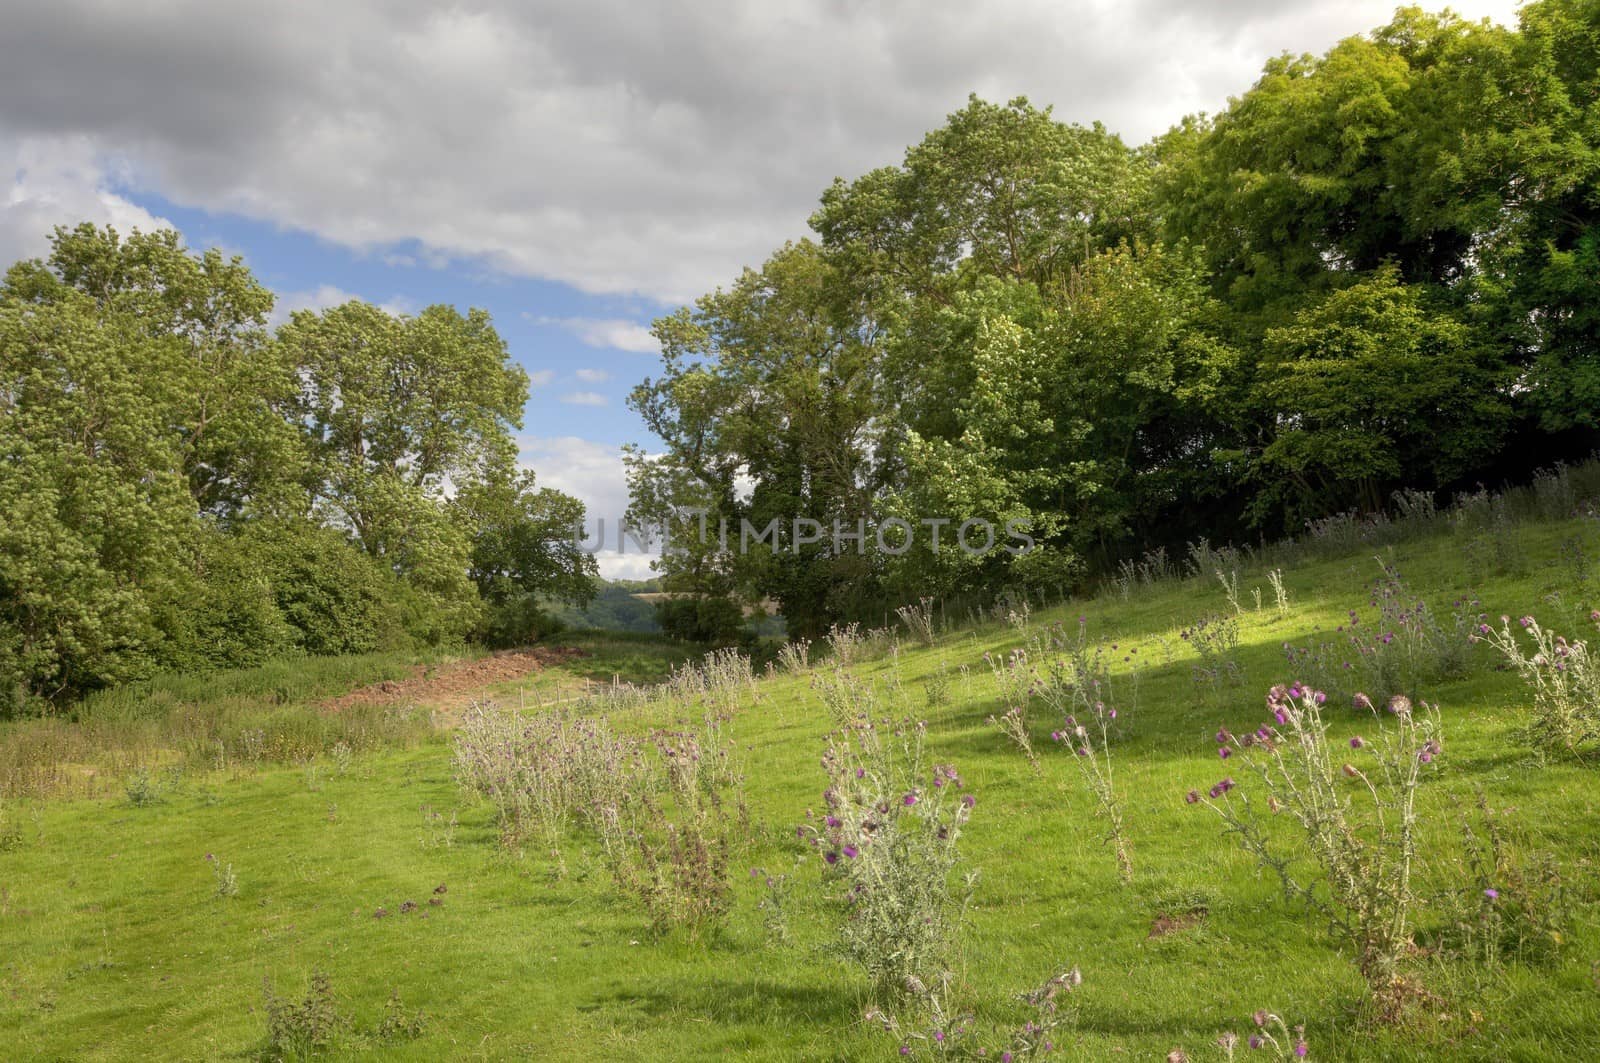 English countryside with oak trees and thistles, Gloucestershire, England.